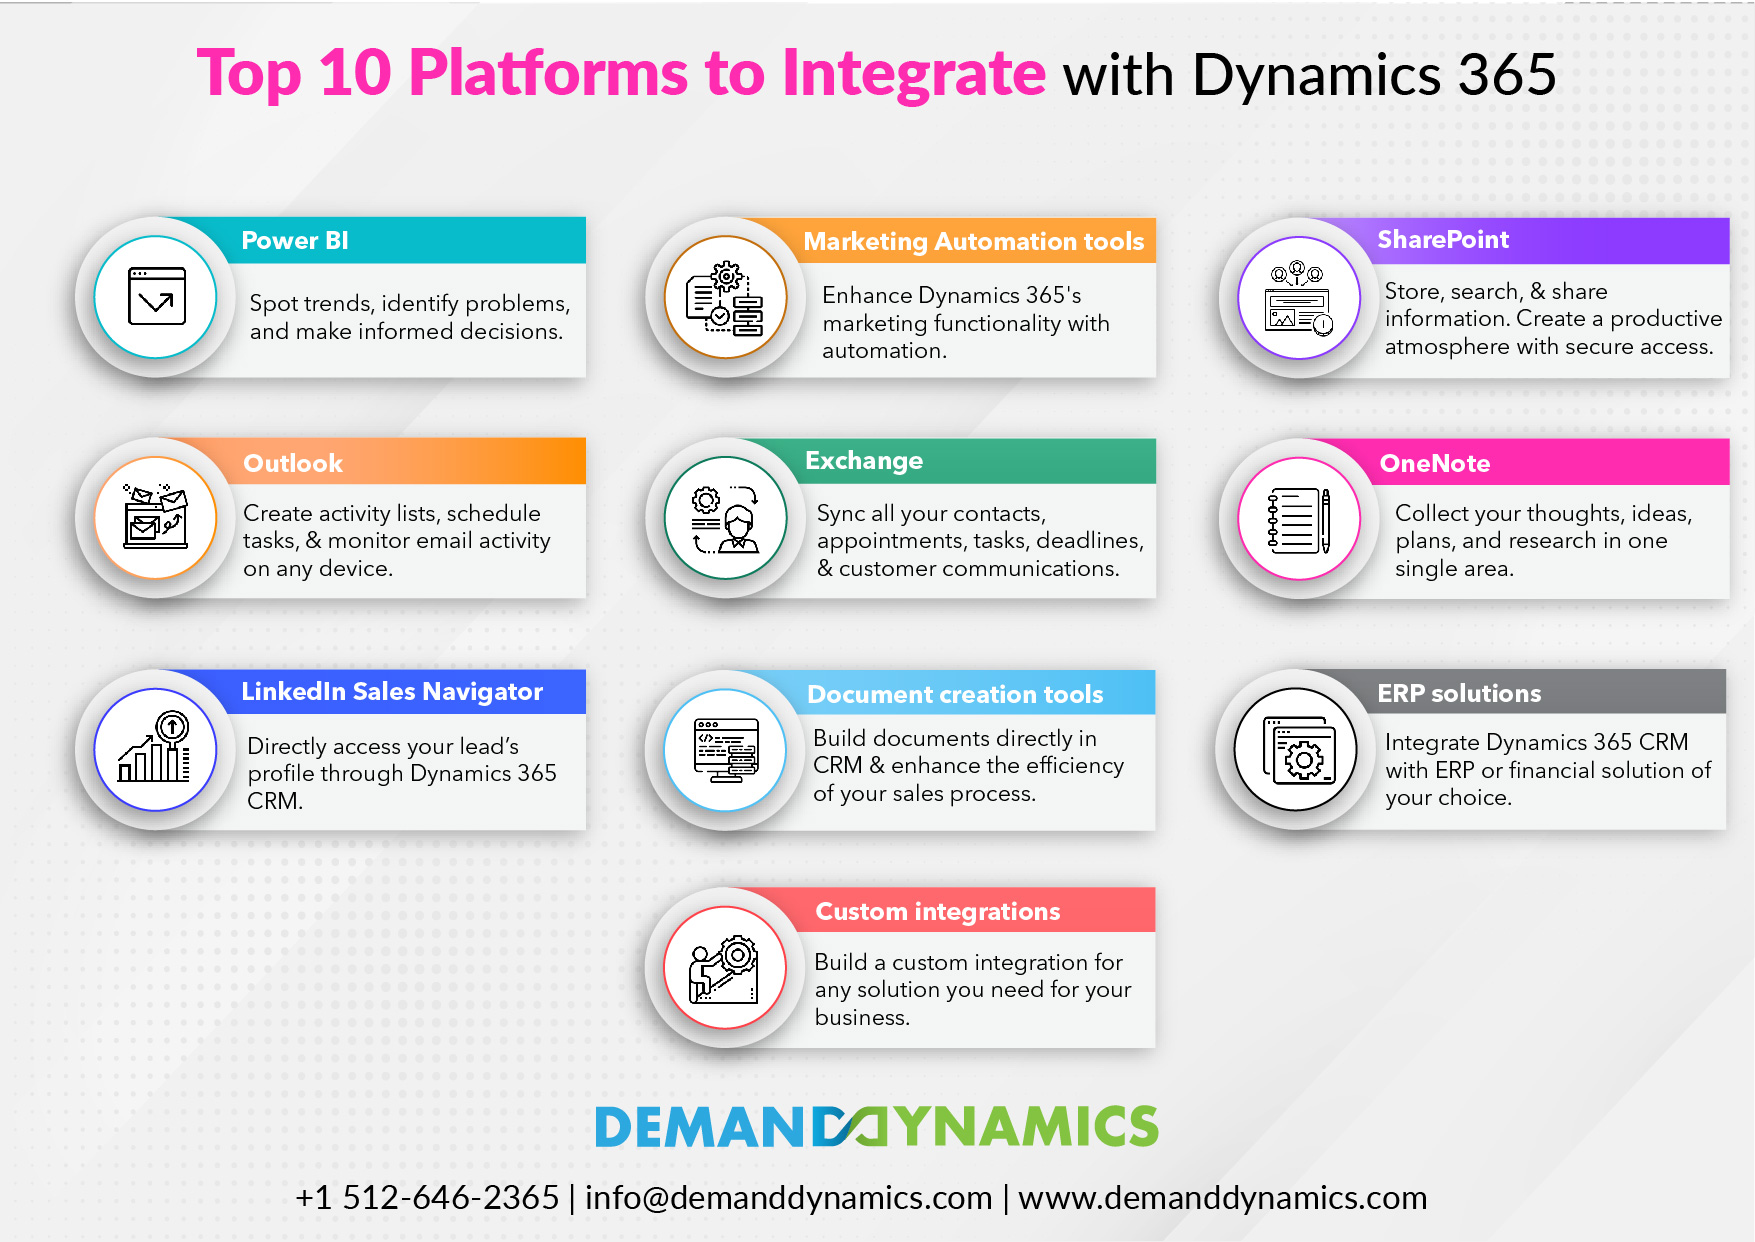 Top Platforms that can be integrated with Dynamics 365